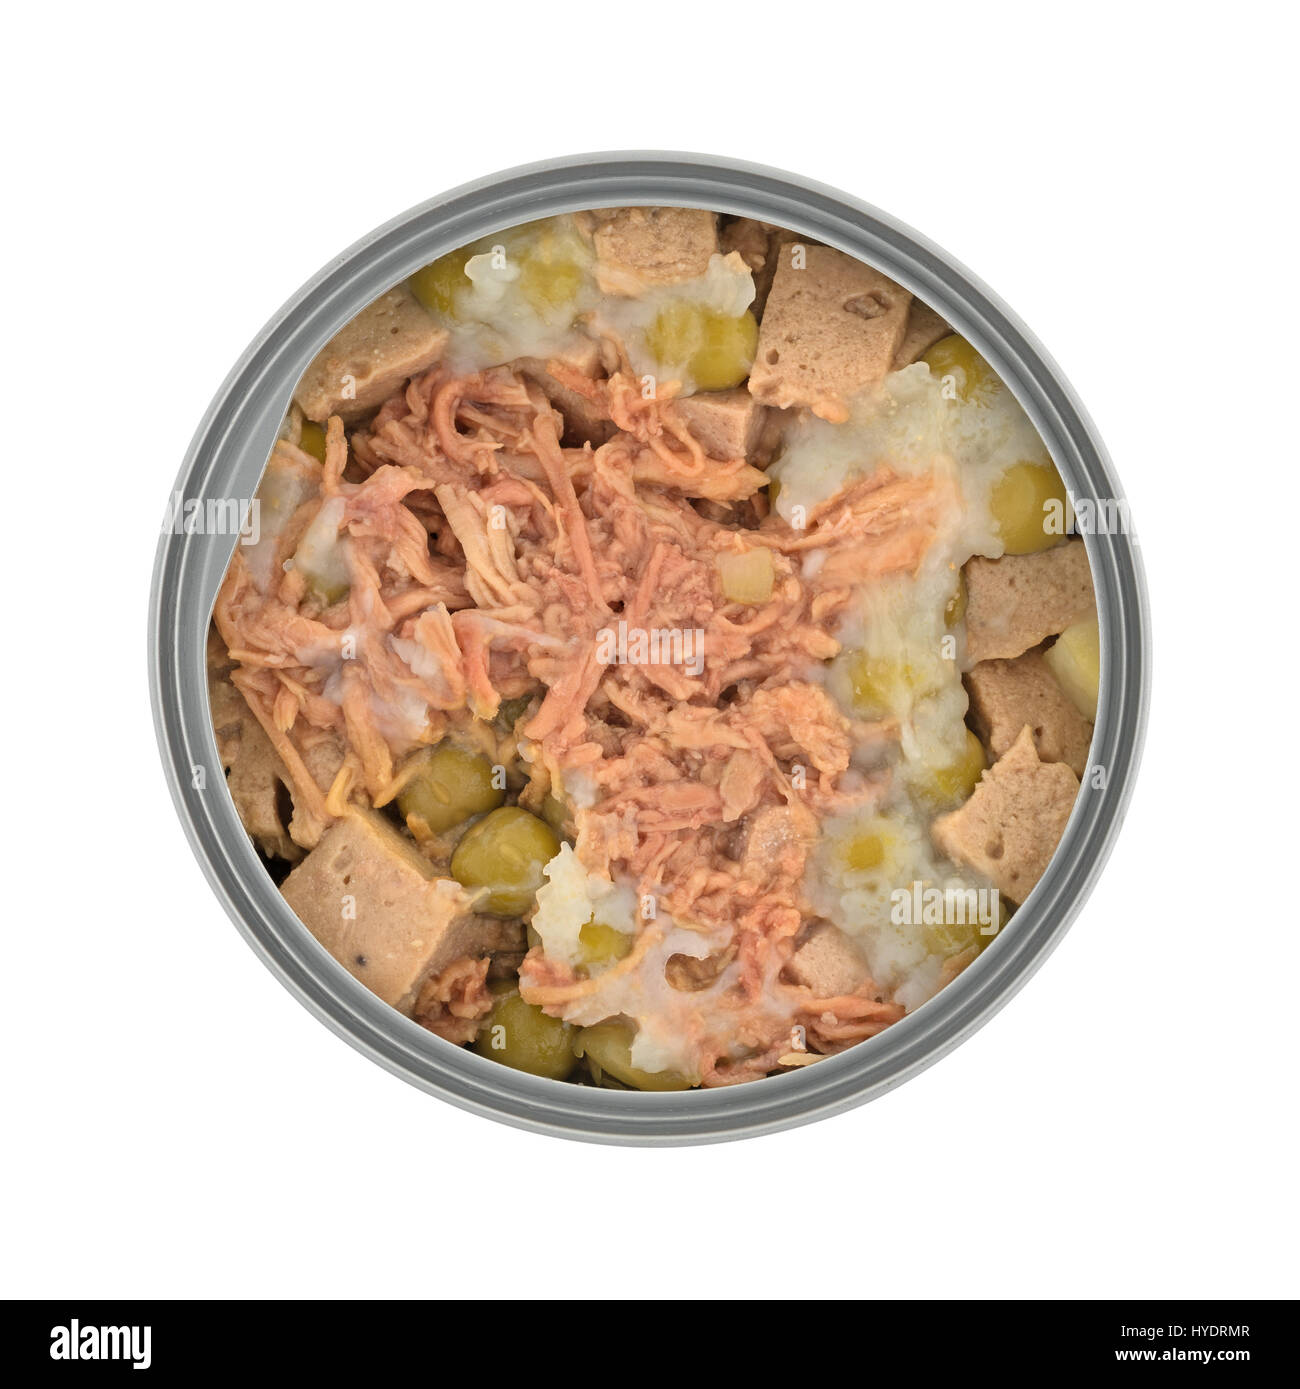 Top view of an opened can of lamb and duck with vegetables gourmet dog food isolated on a white background. Stock Photo